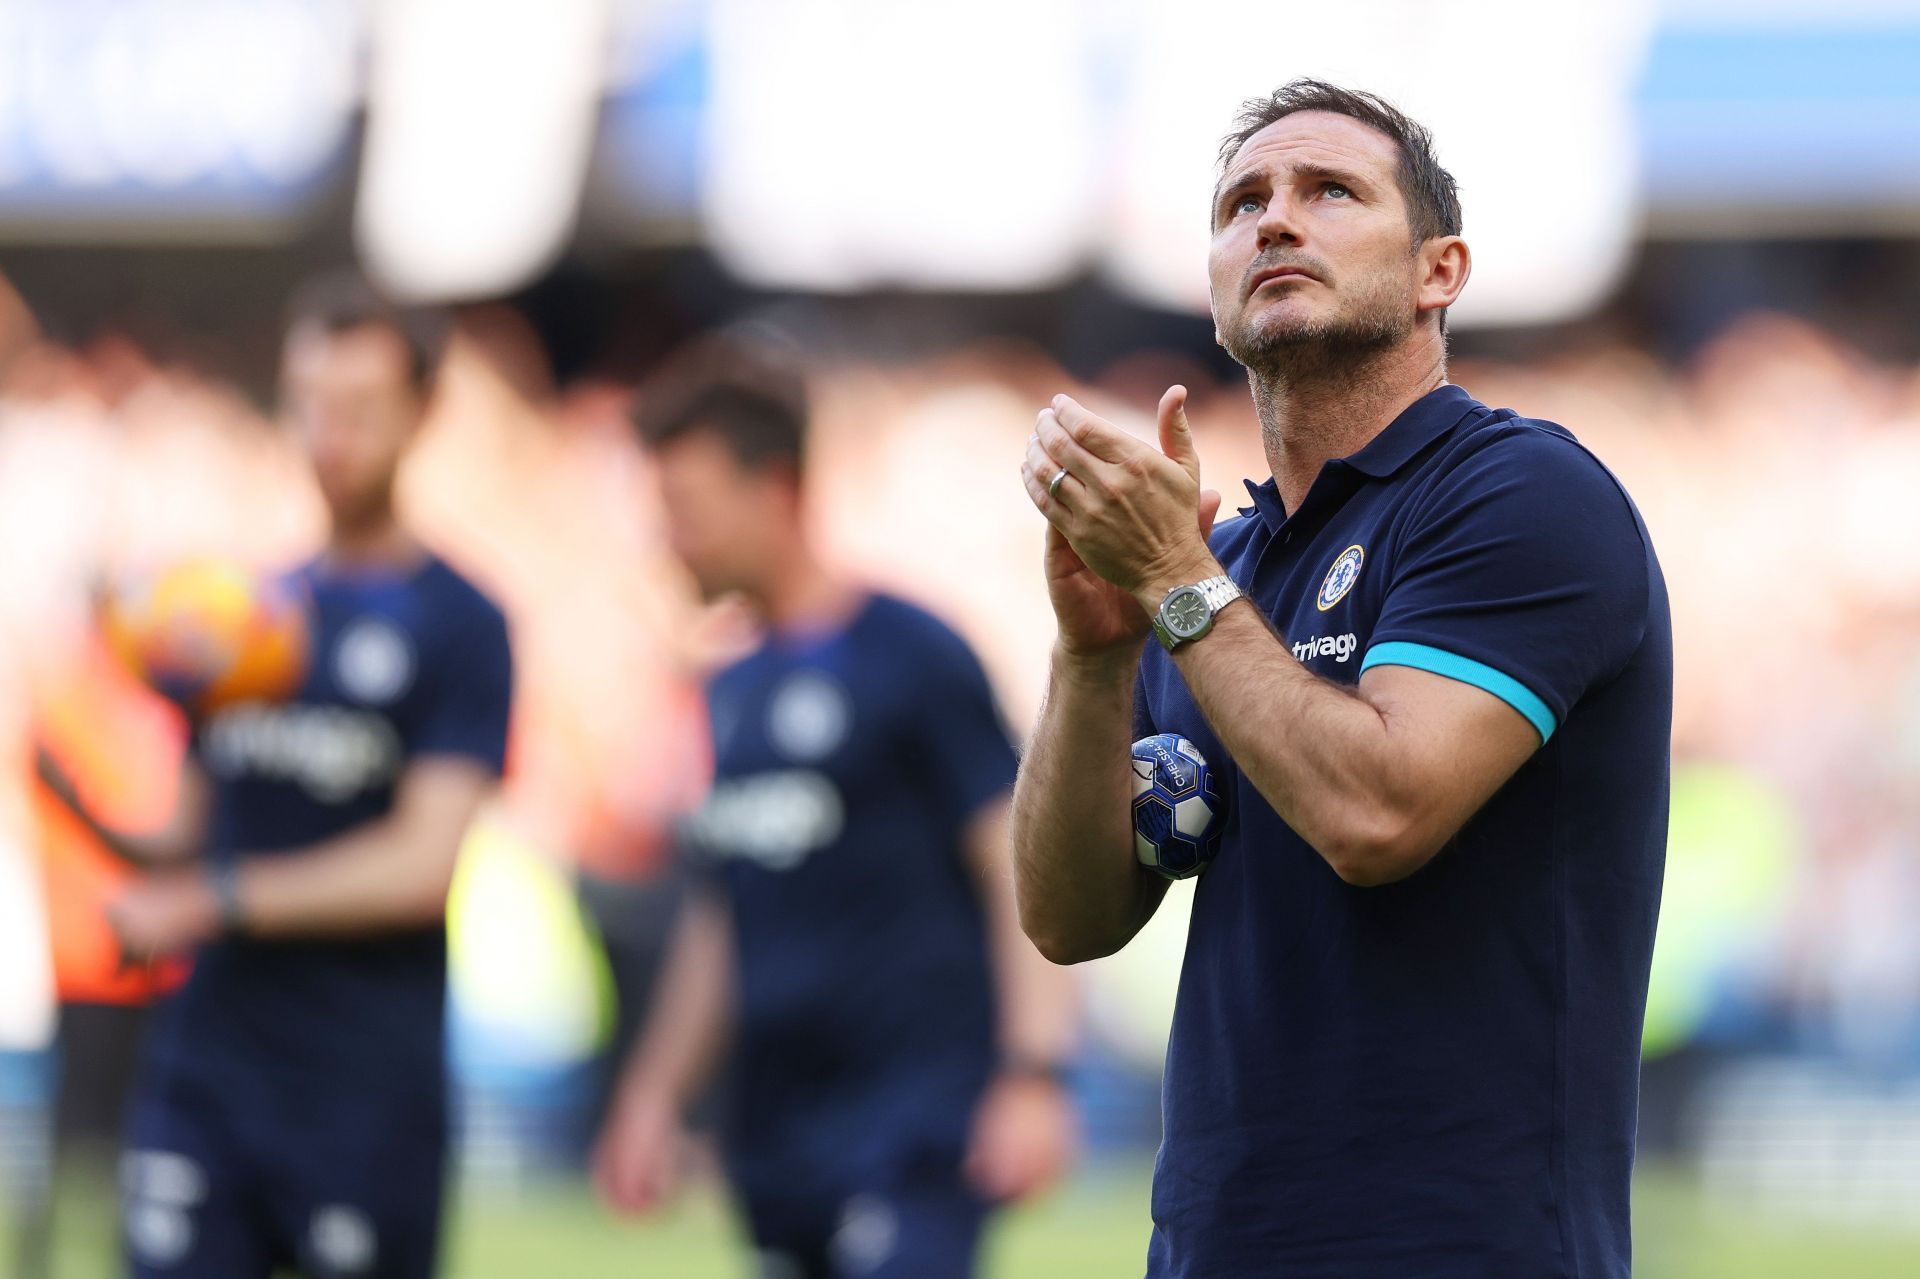 Frank Lampard had a disappointing caretaker reign at Stamford Bridge.